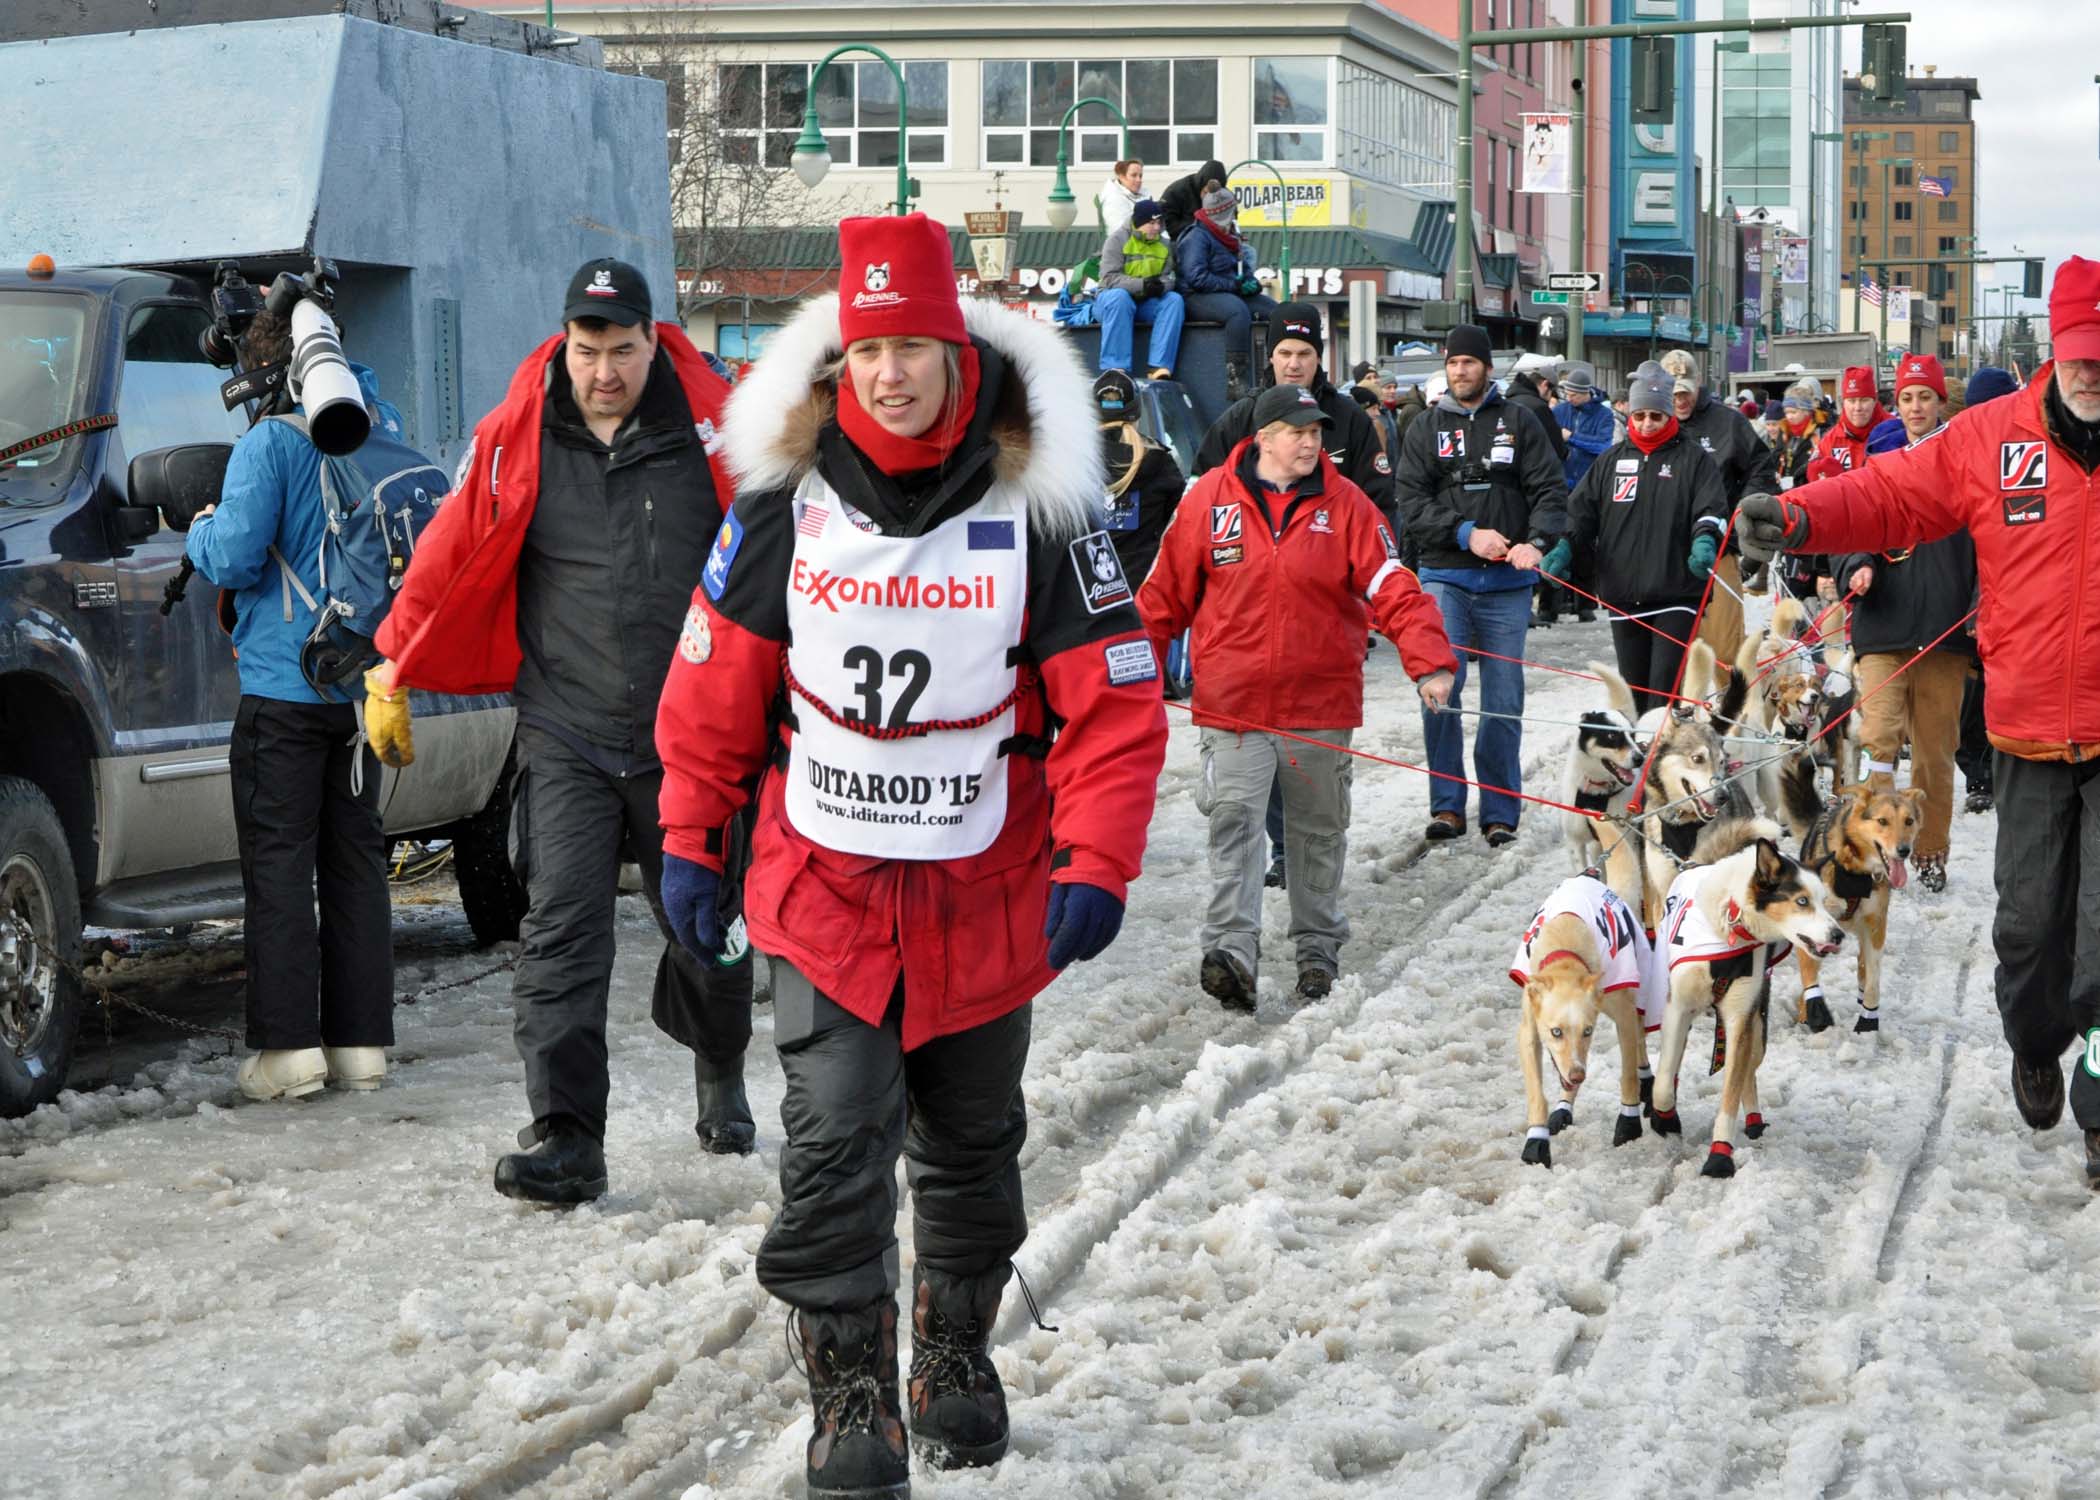 Aliy Zirkle makes her way to the starting line for the ceremonial start of the 2014 Iditarod. (Photo By Patrick Yack - Alaska Public Media)